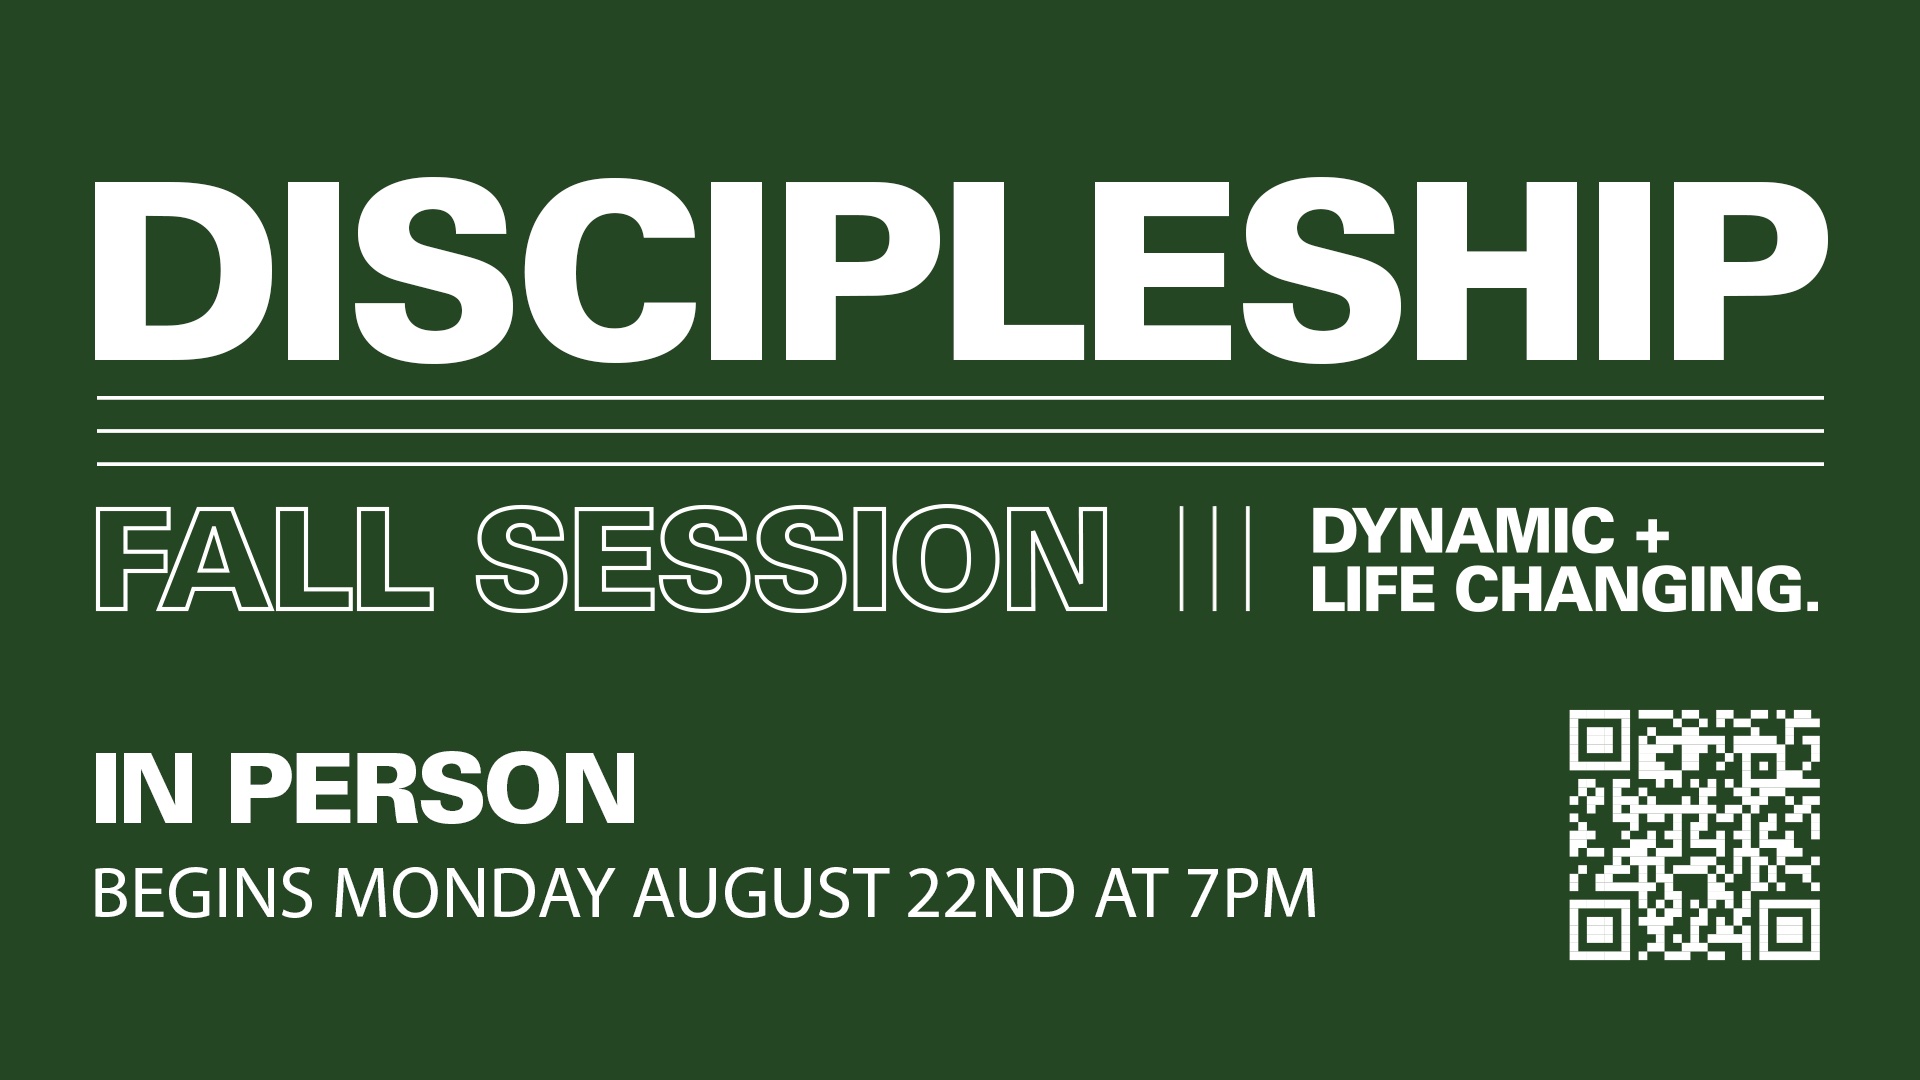 School of Discipleship - Fall Session at the Braselton campus